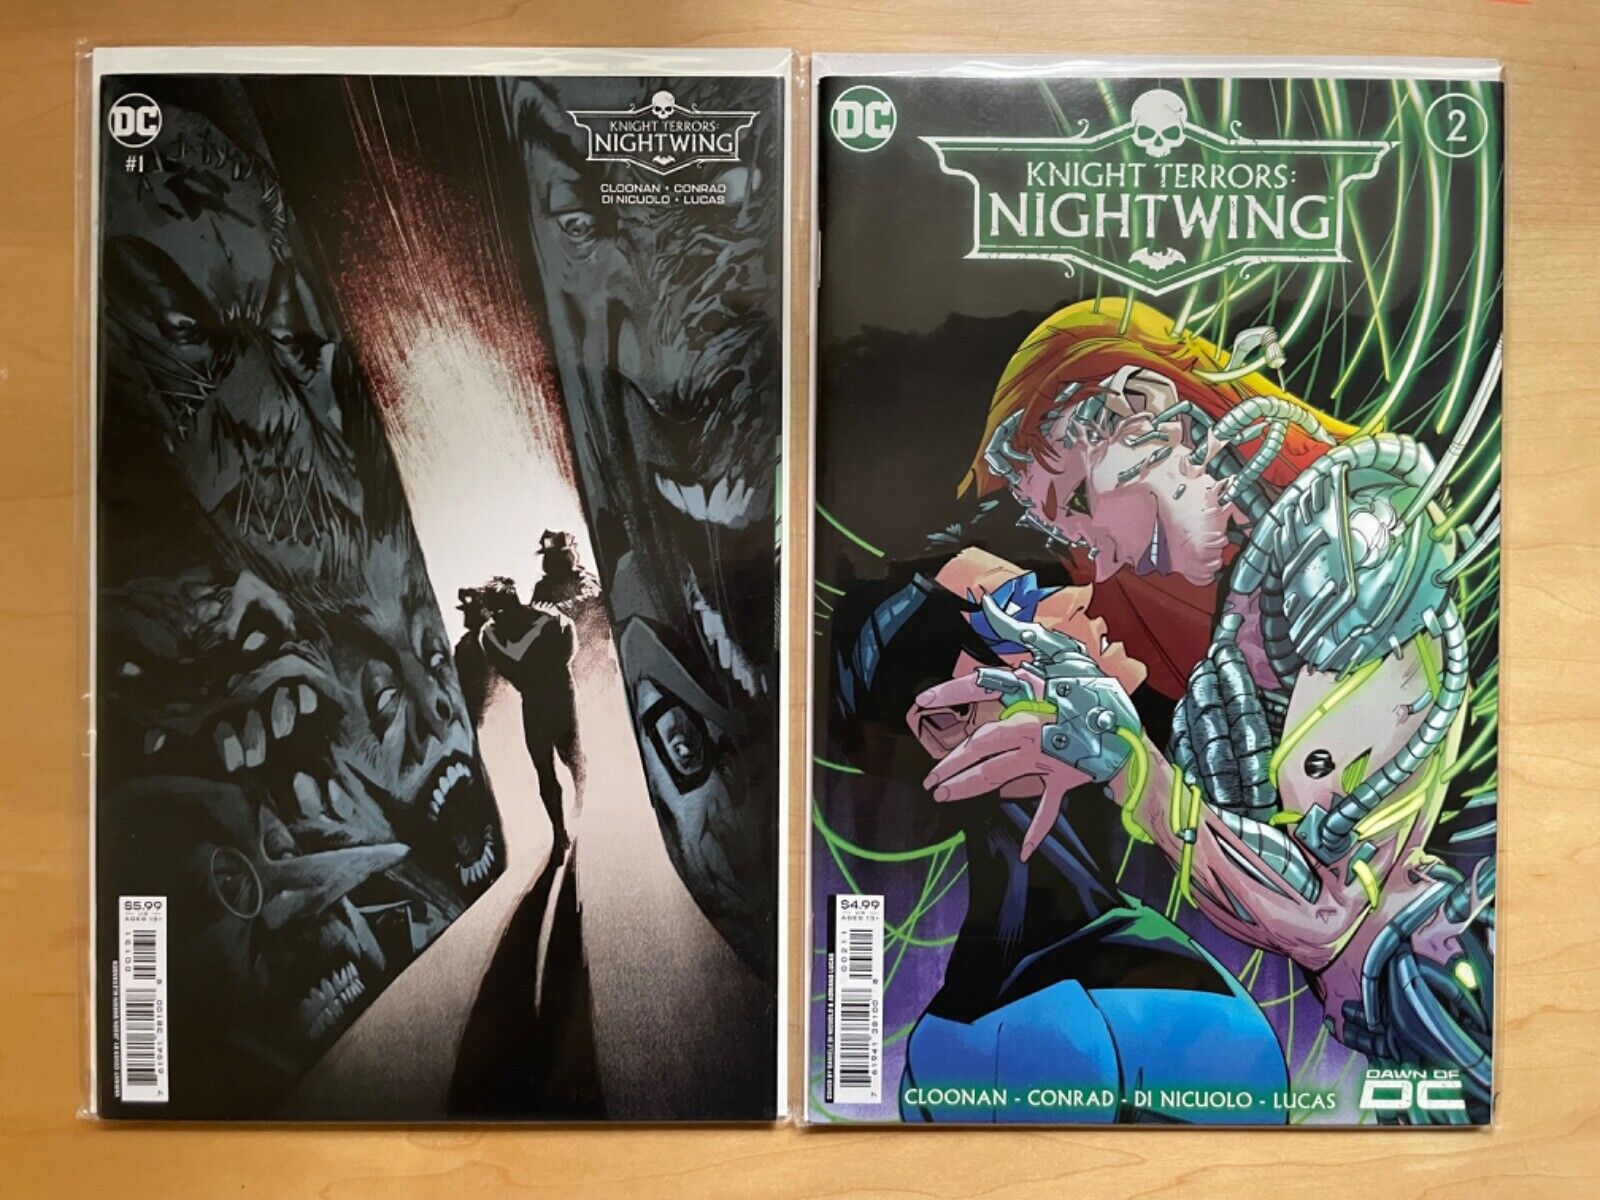 Knight Terrors: Nightwing #1 and #2 (DC comics 2023)